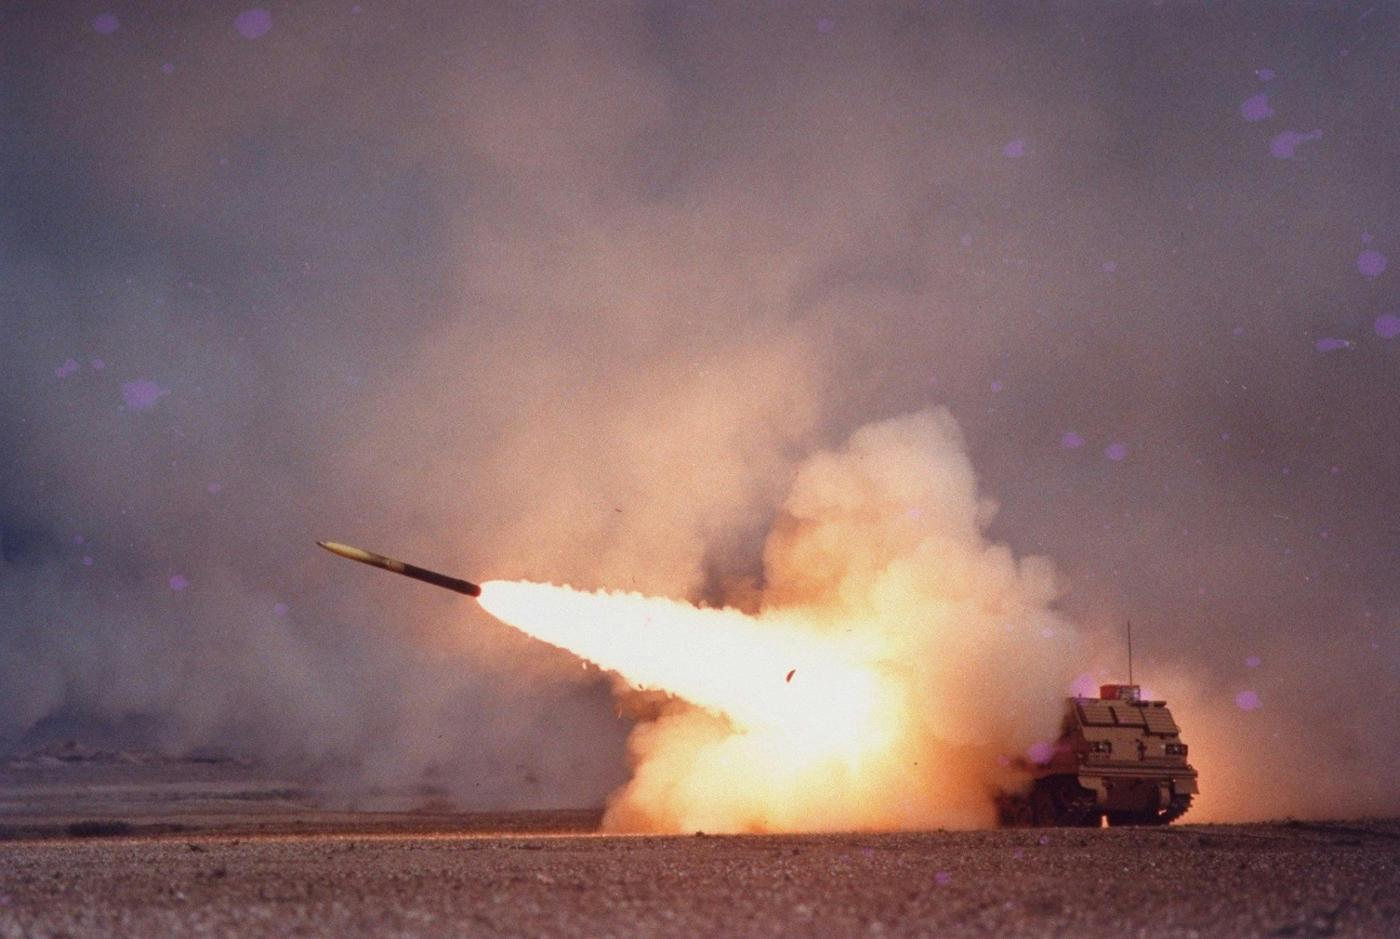 The United States Army First Cavalry’s Multiple Launch Rocket System firing a rocket during the Gulf War. © Steve Elfers / The LIFE Picture Collection, via Getty Images
)